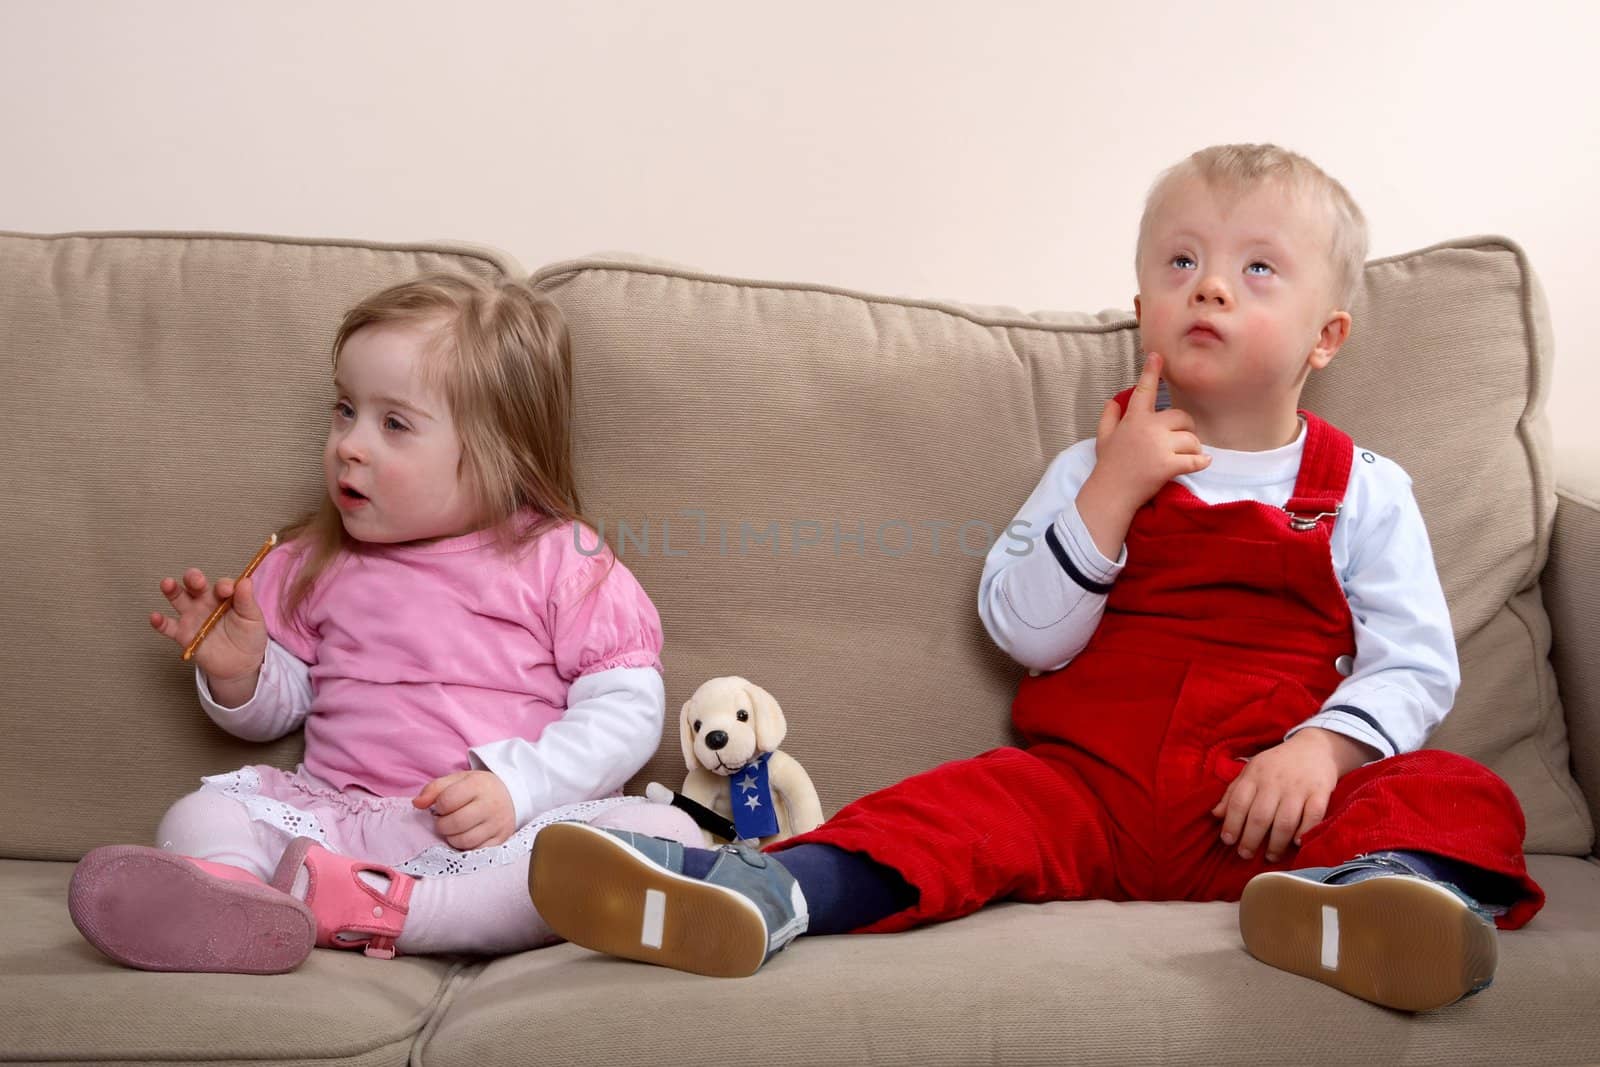 A little boy and girl with Down syndrome sitting on a sofa